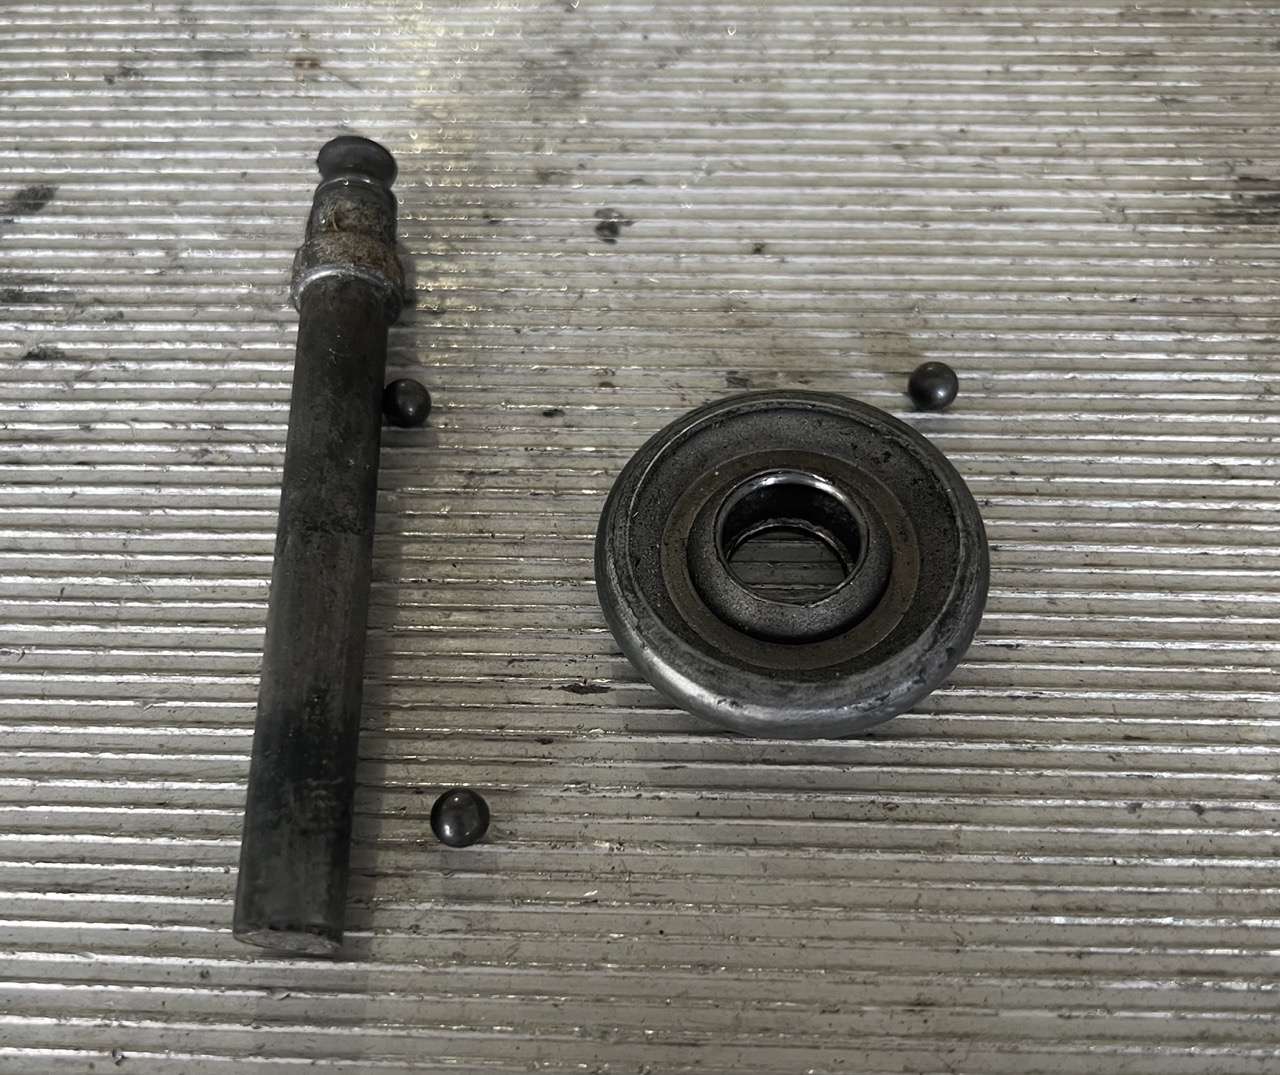 Stem completely broke off metal garage door roller. You can see the ball bearings in the picure.